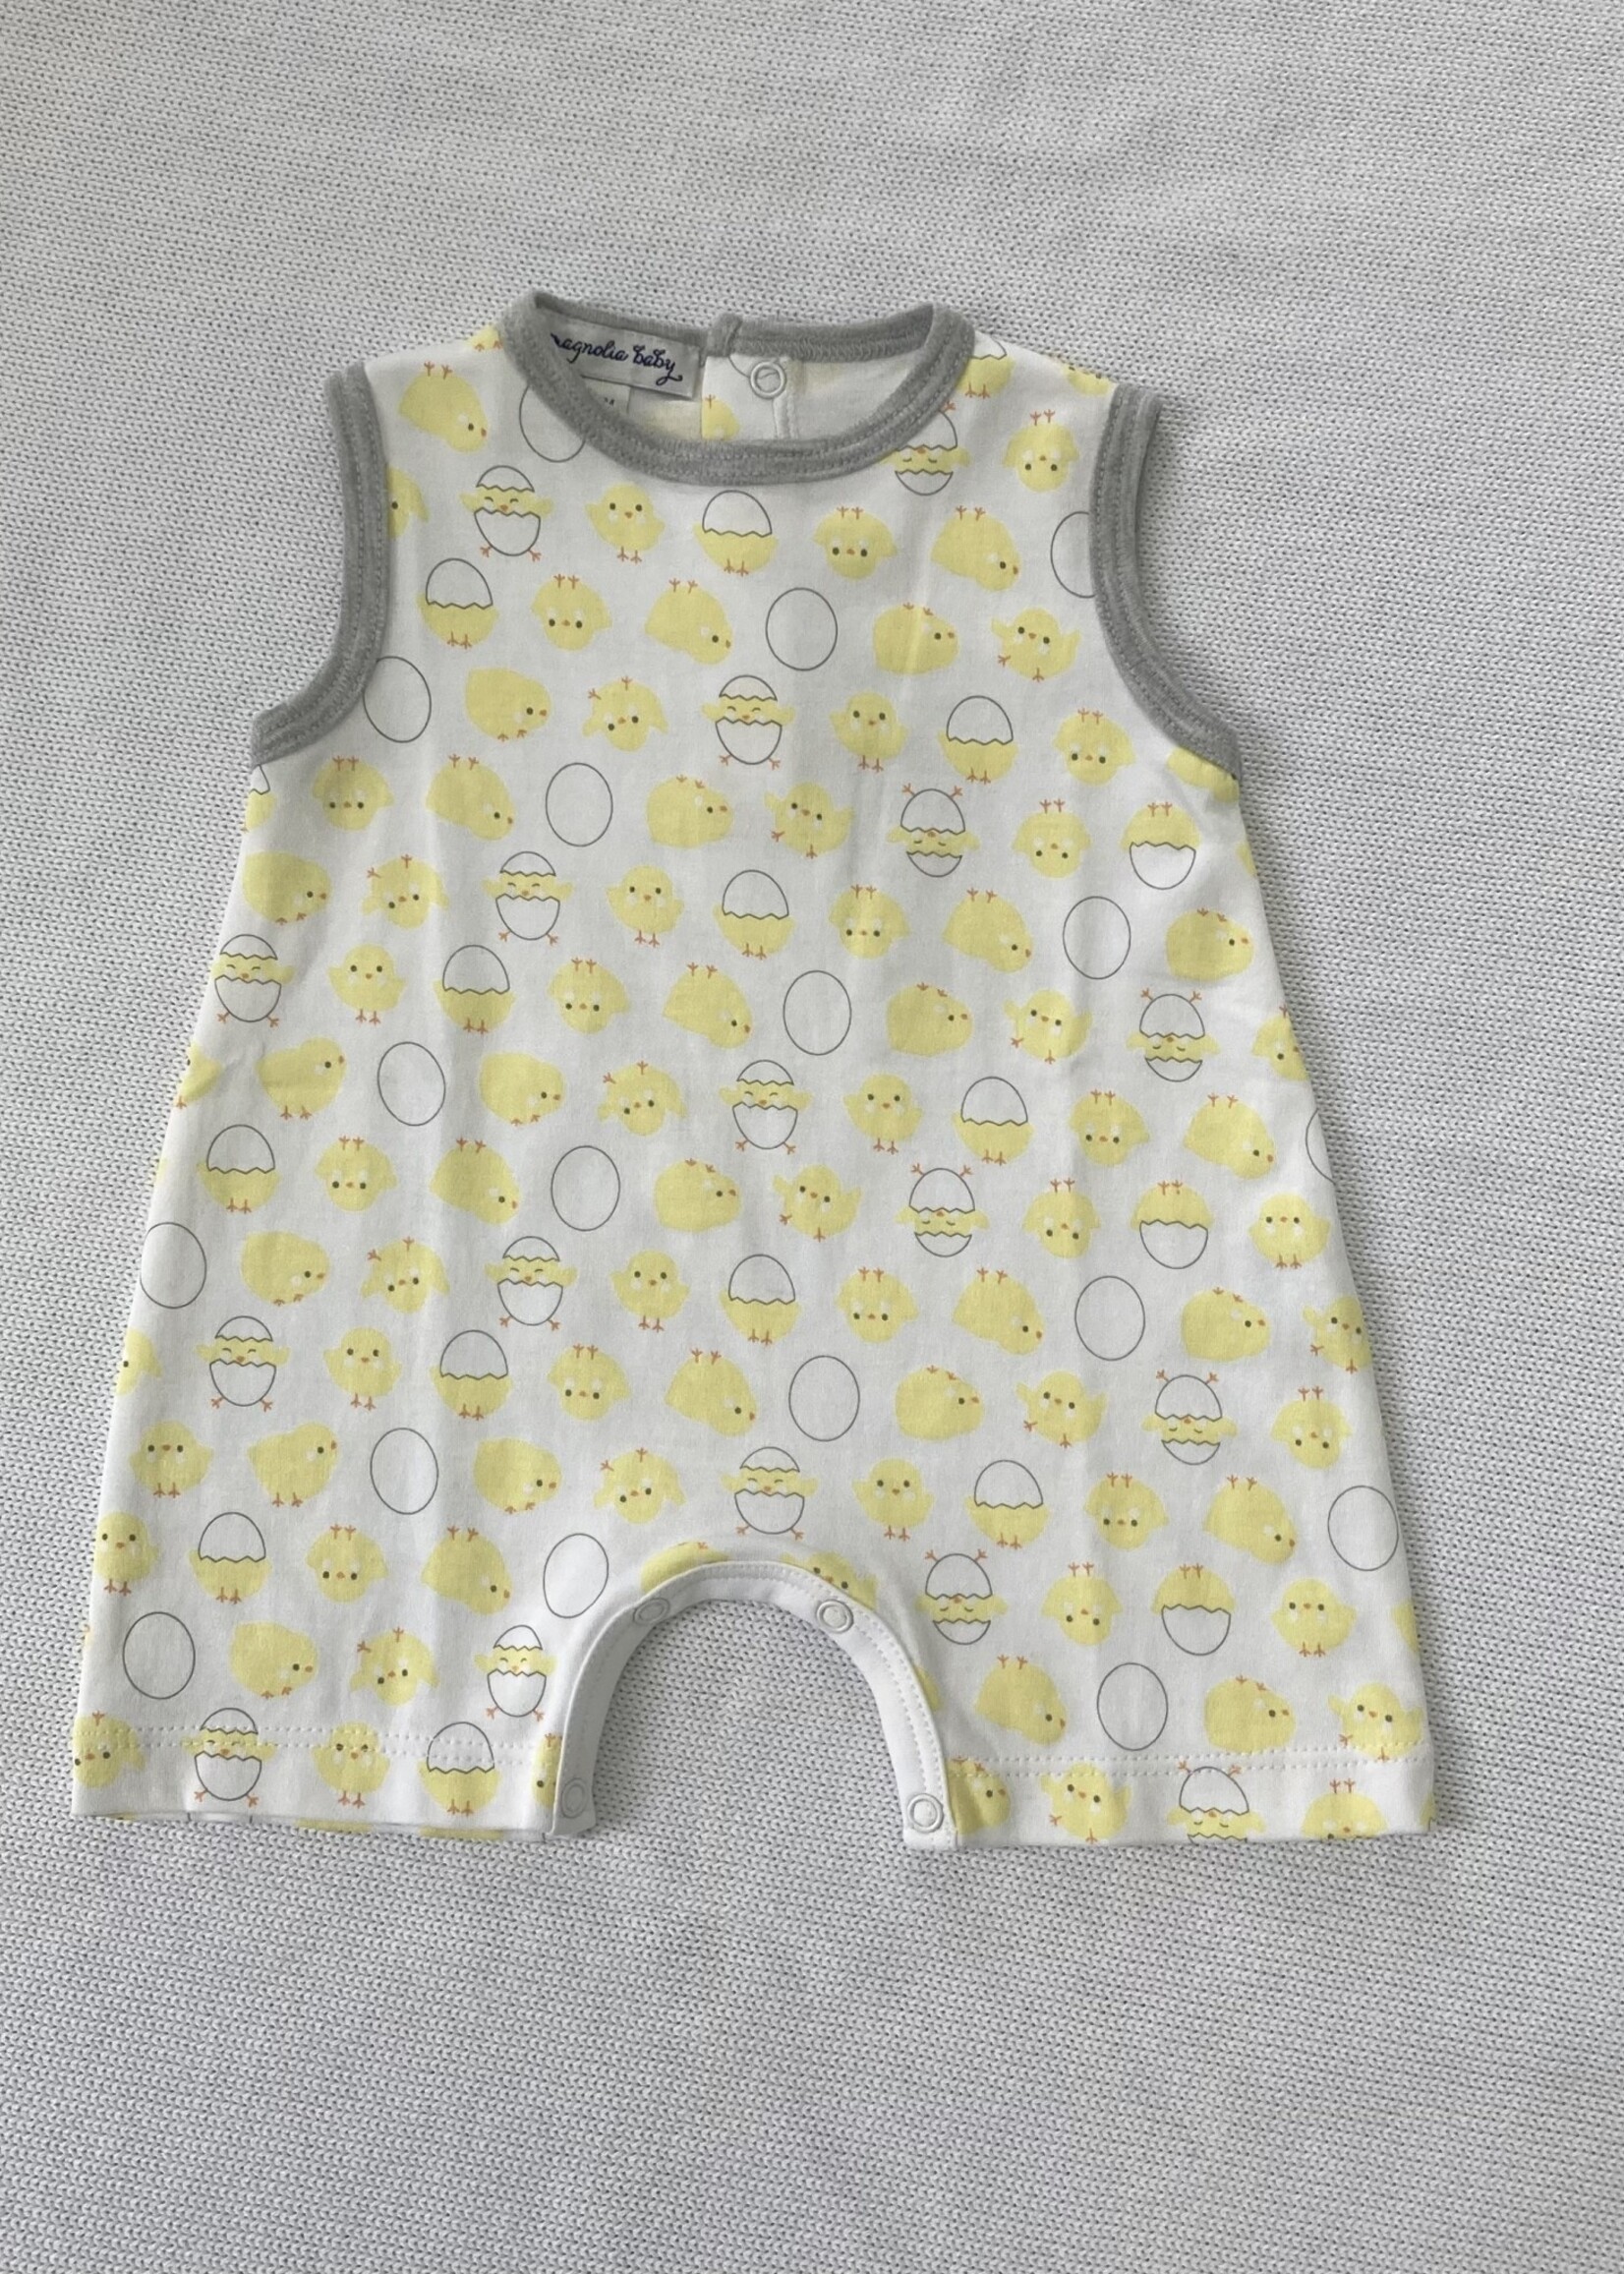 Magnolia Baby Yellow Hatchlings Printed Short Playsuit